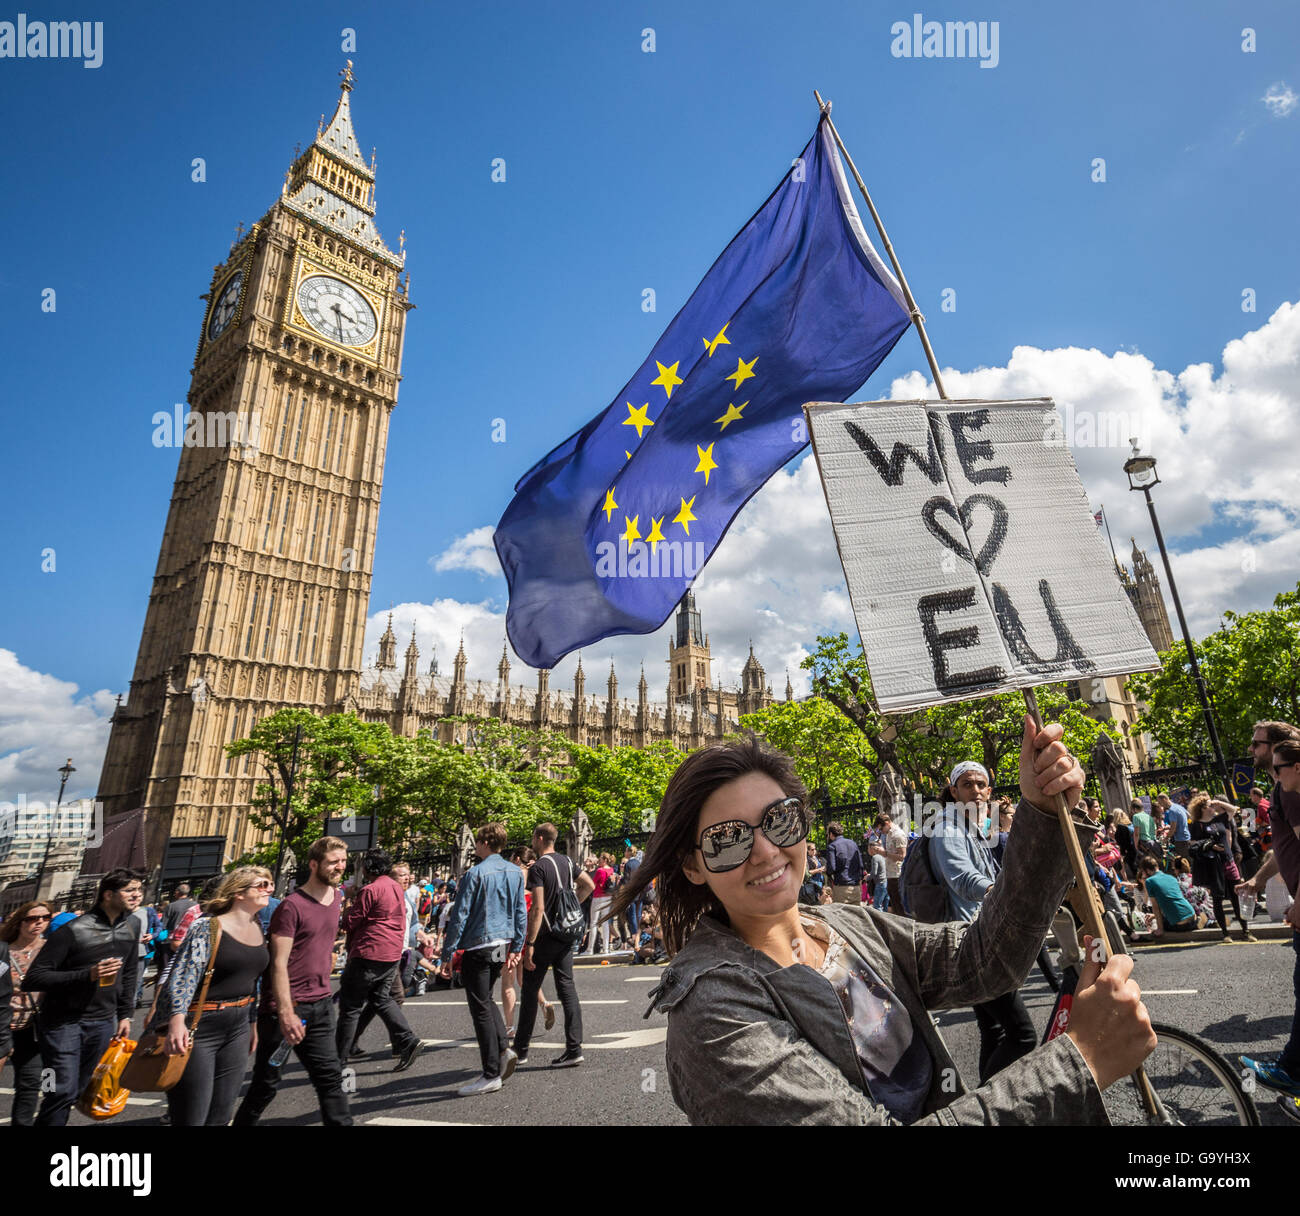 London, UK. 2nd July, 2016. ’March For Europe’ protest against the Brexit EU Referendum saw tens of thousands of anti-Brexit protesters marching through central London to rally in Westminster’s Parliament Square Credit:  Guy Corbishley/Alamy Live News Stock Photo